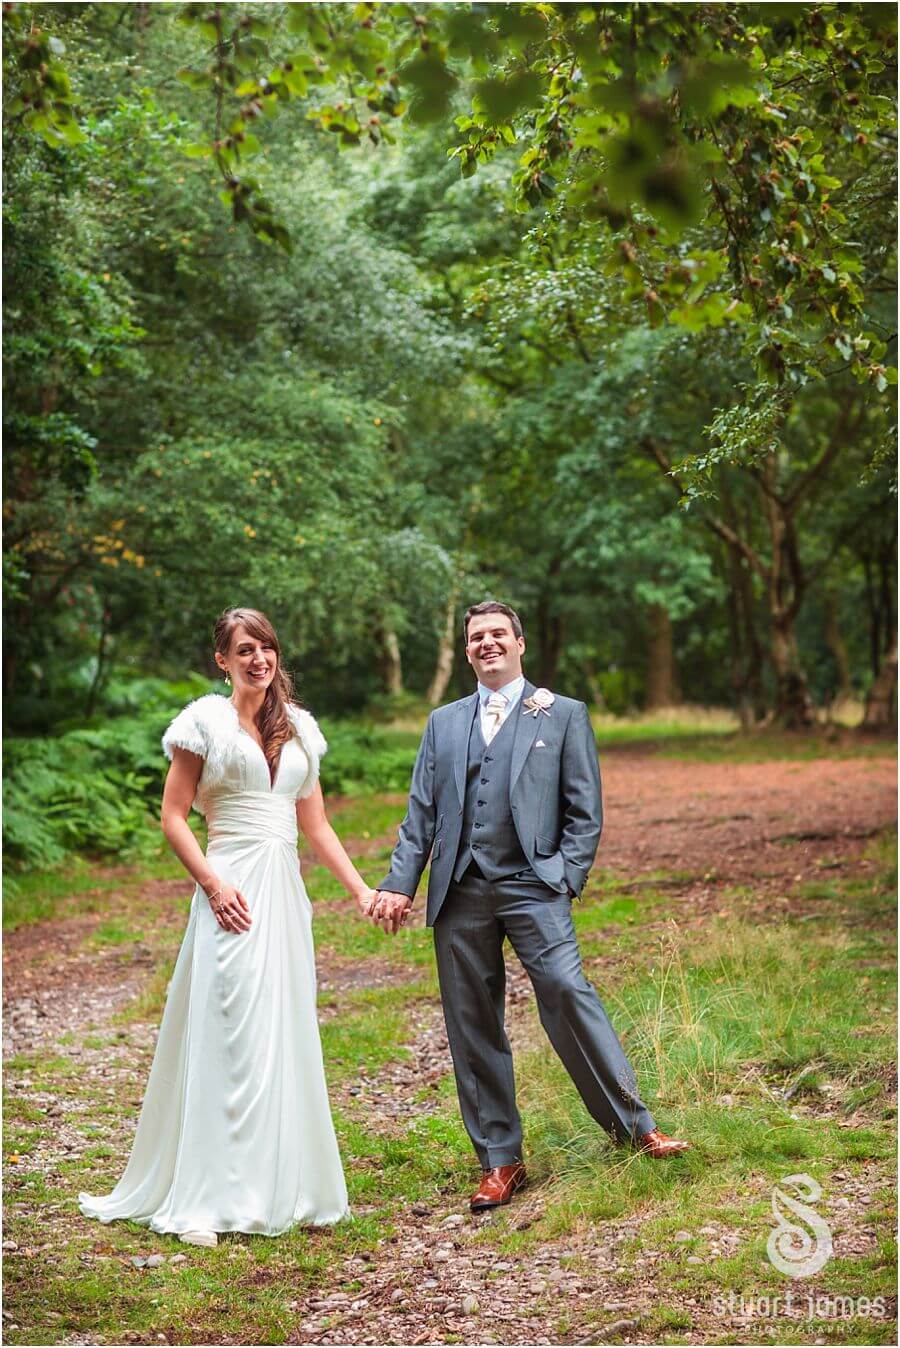 Beautiful timeless portraits of Bride and Groom at Cannock Chase for wedding at The Barns in Cannock by Creative Wedding Photographer Stuart James